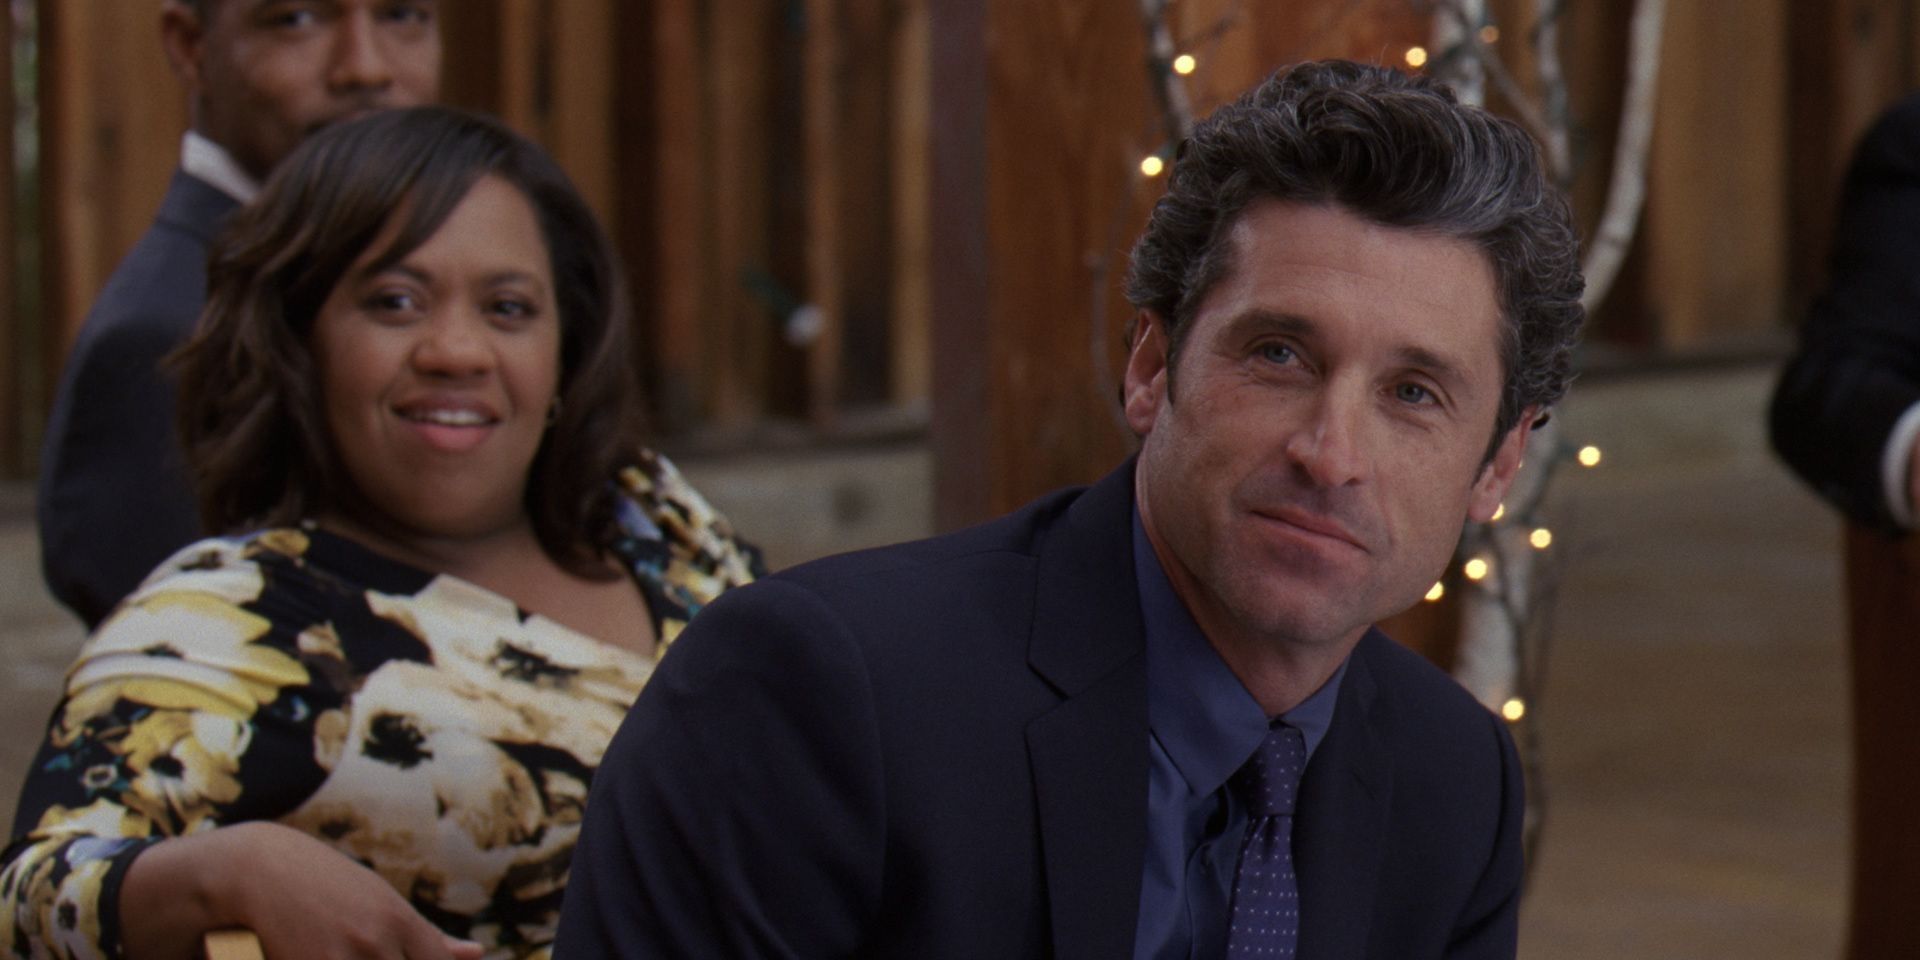 Bailey and Derek sitting together and smiling on Grey's Anatomy